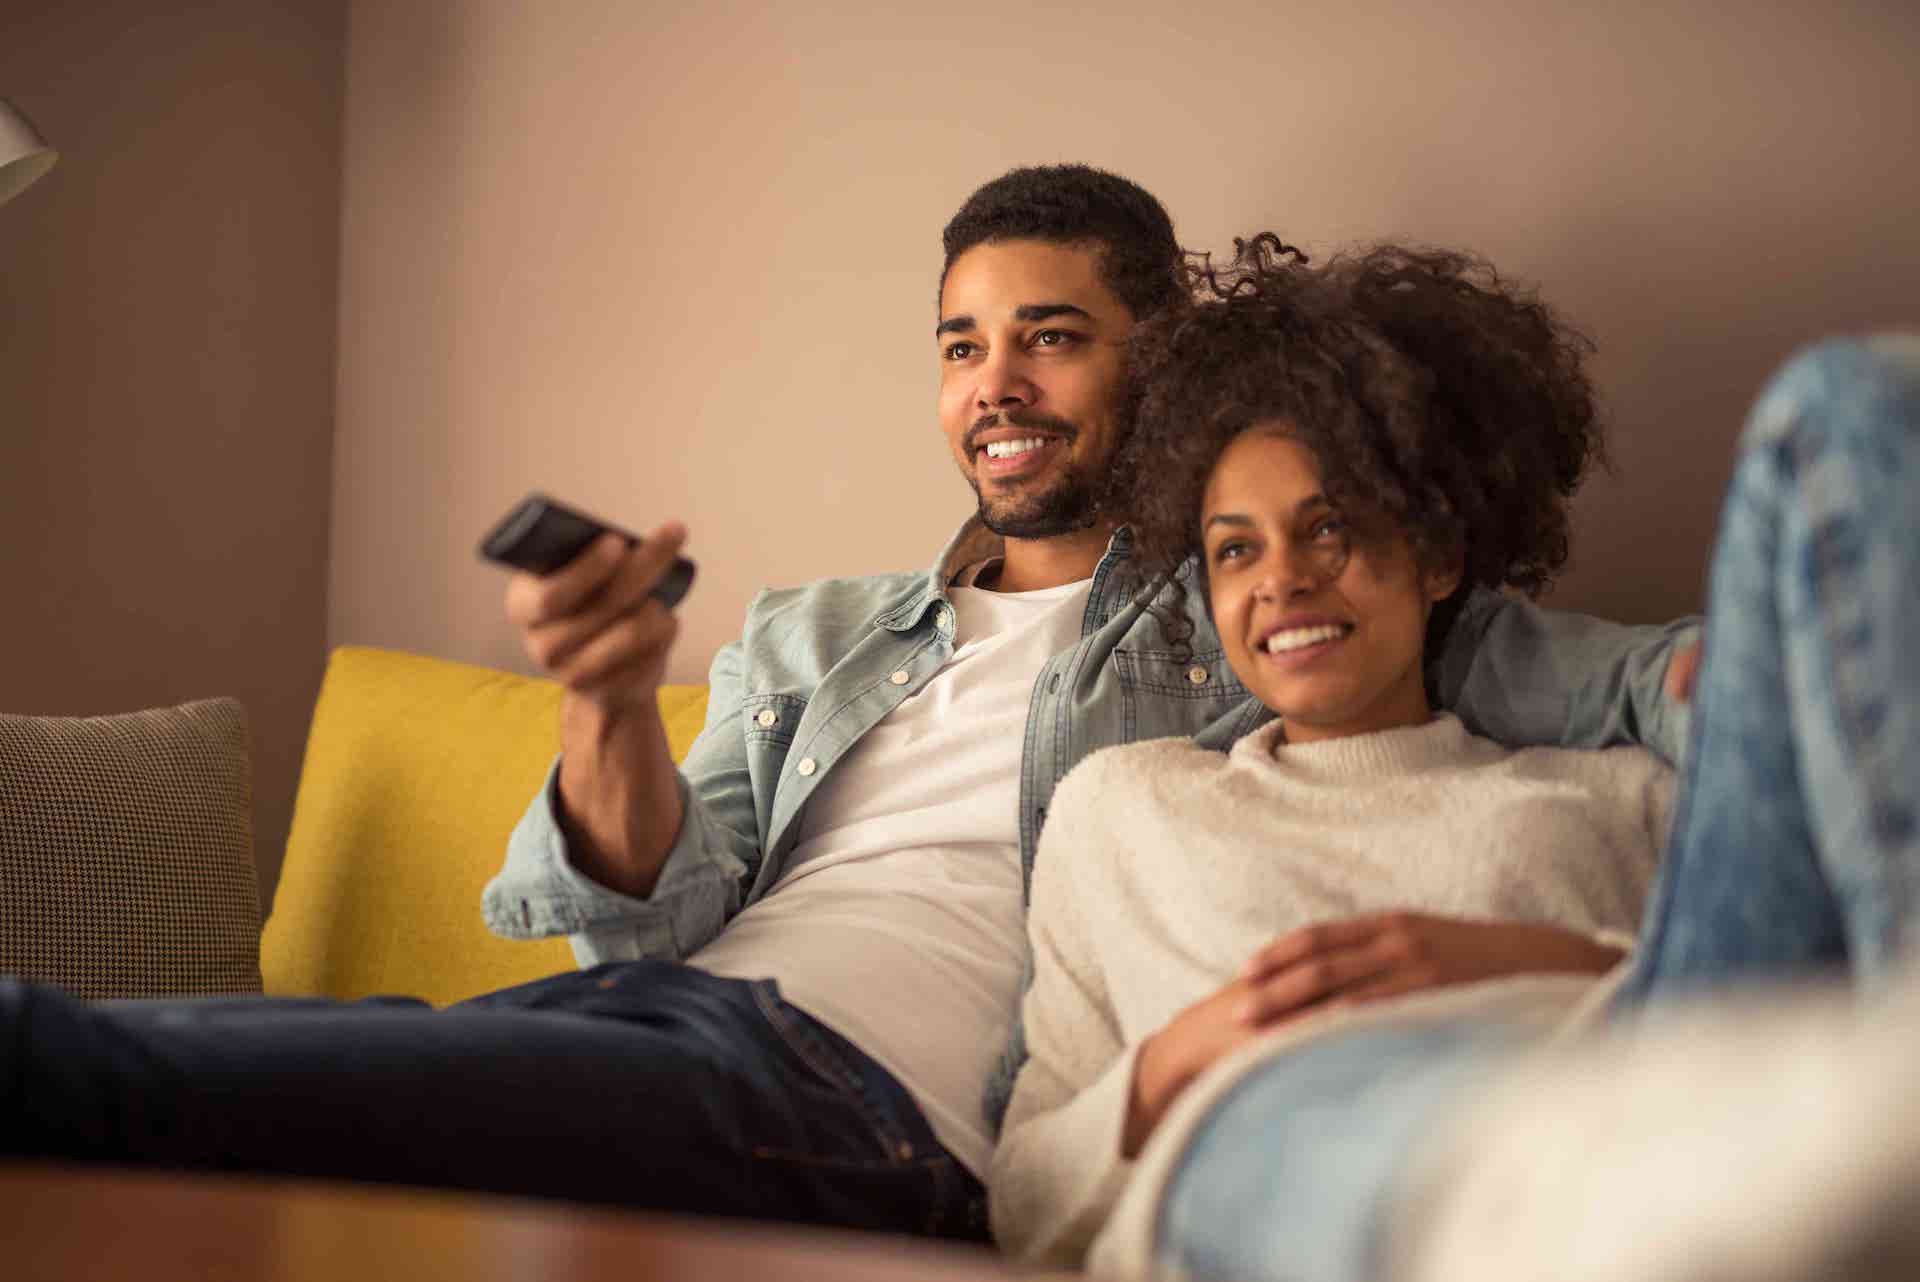 Man and woman lounging on a couch watching television